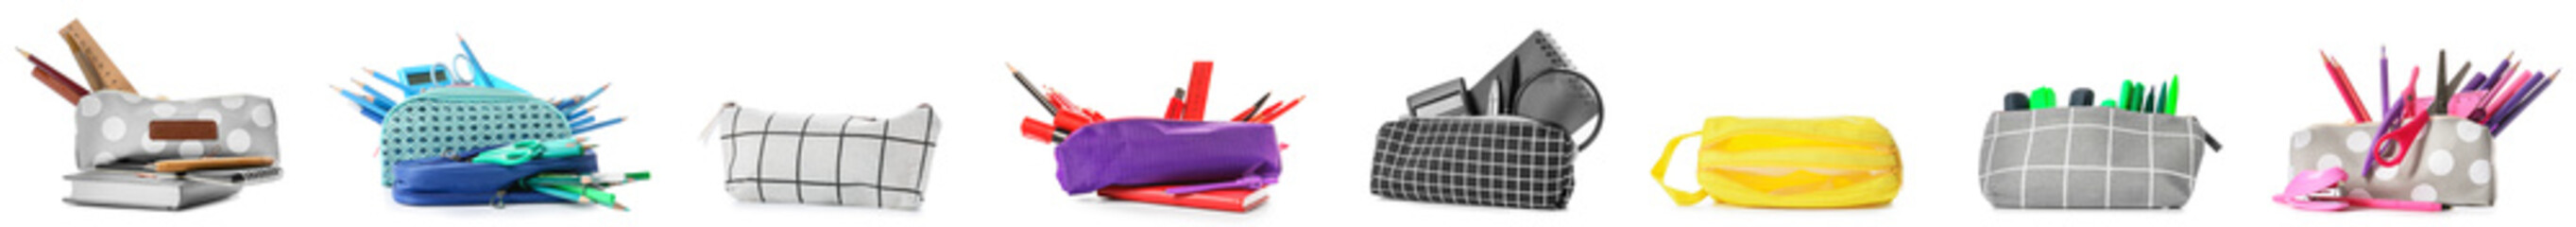 Set of pencil cases with school stationery on white background